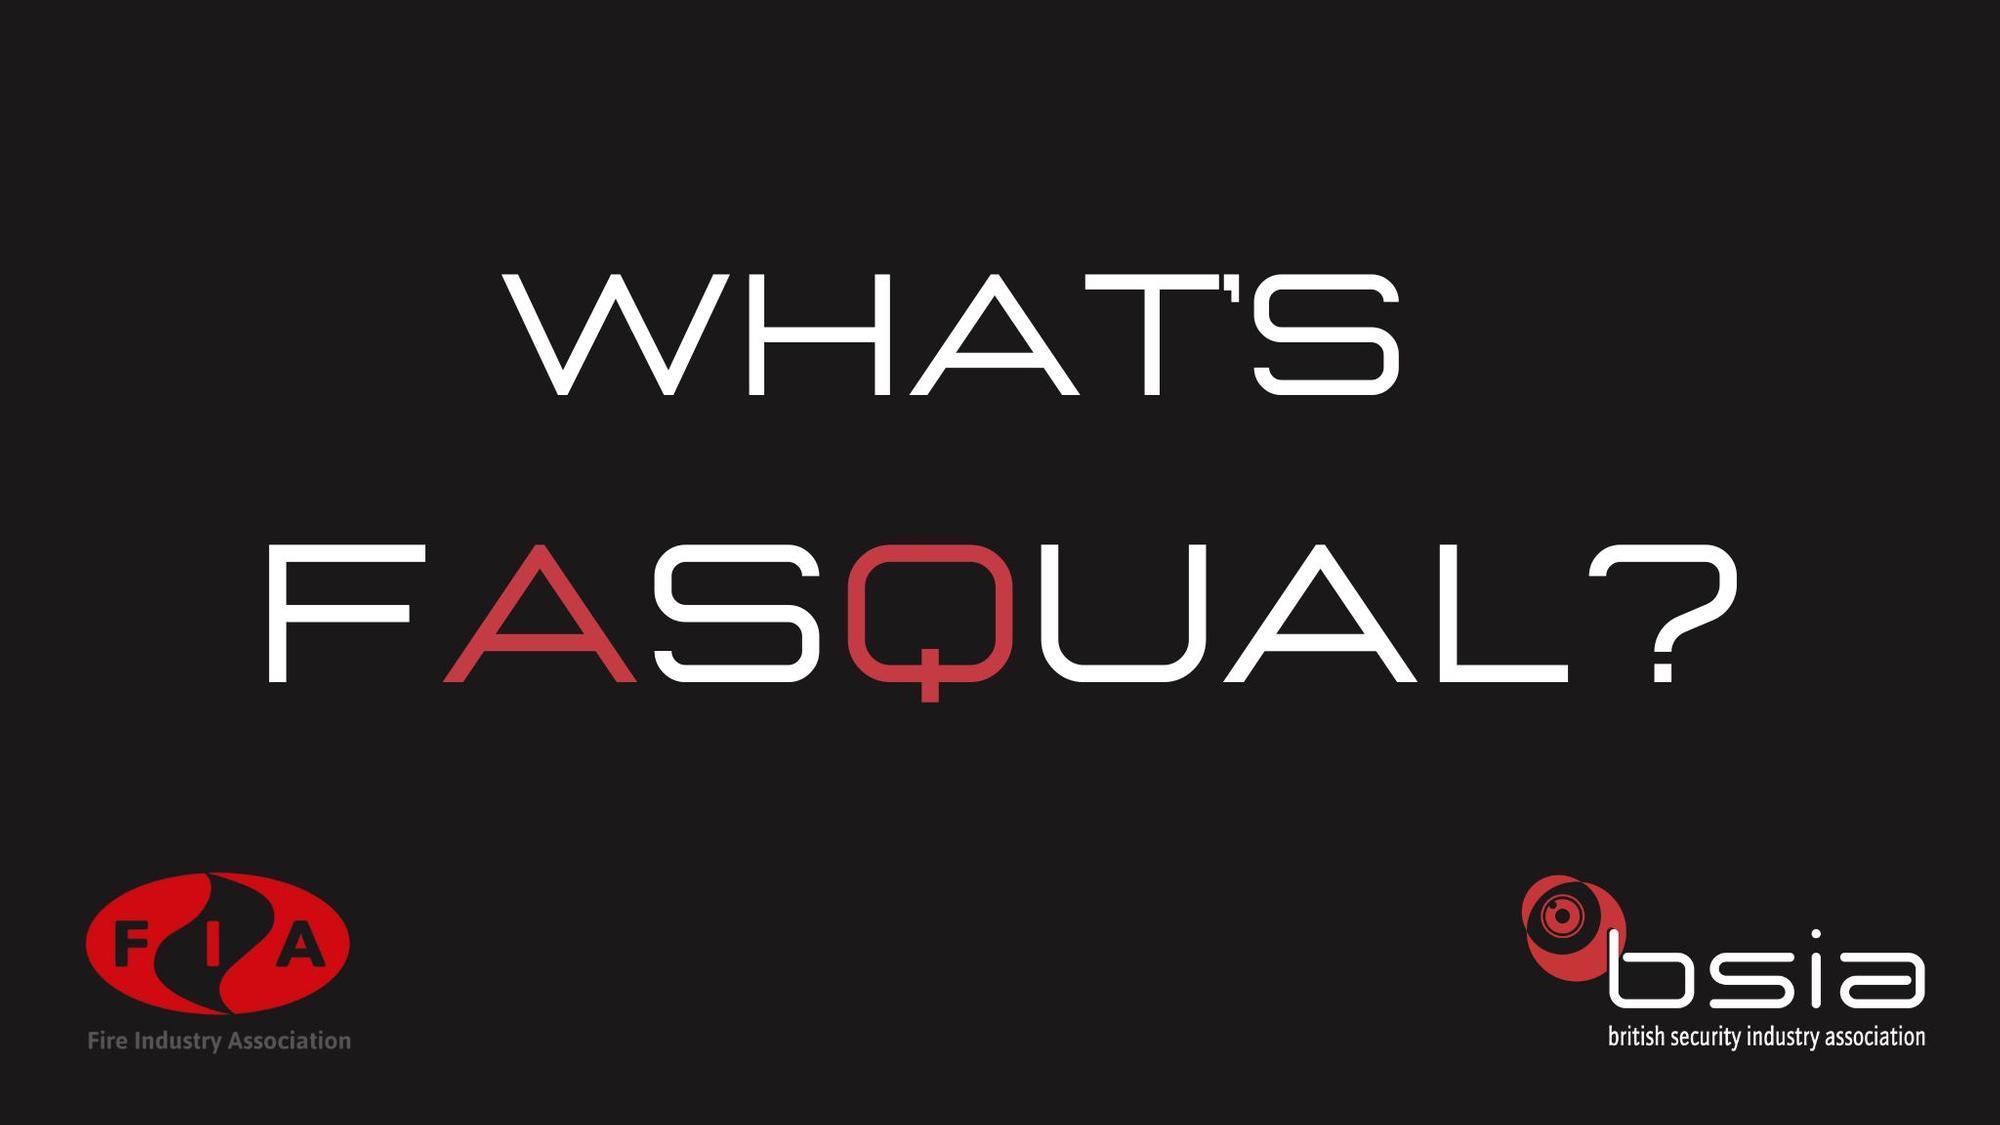 What’s FASQUAL?